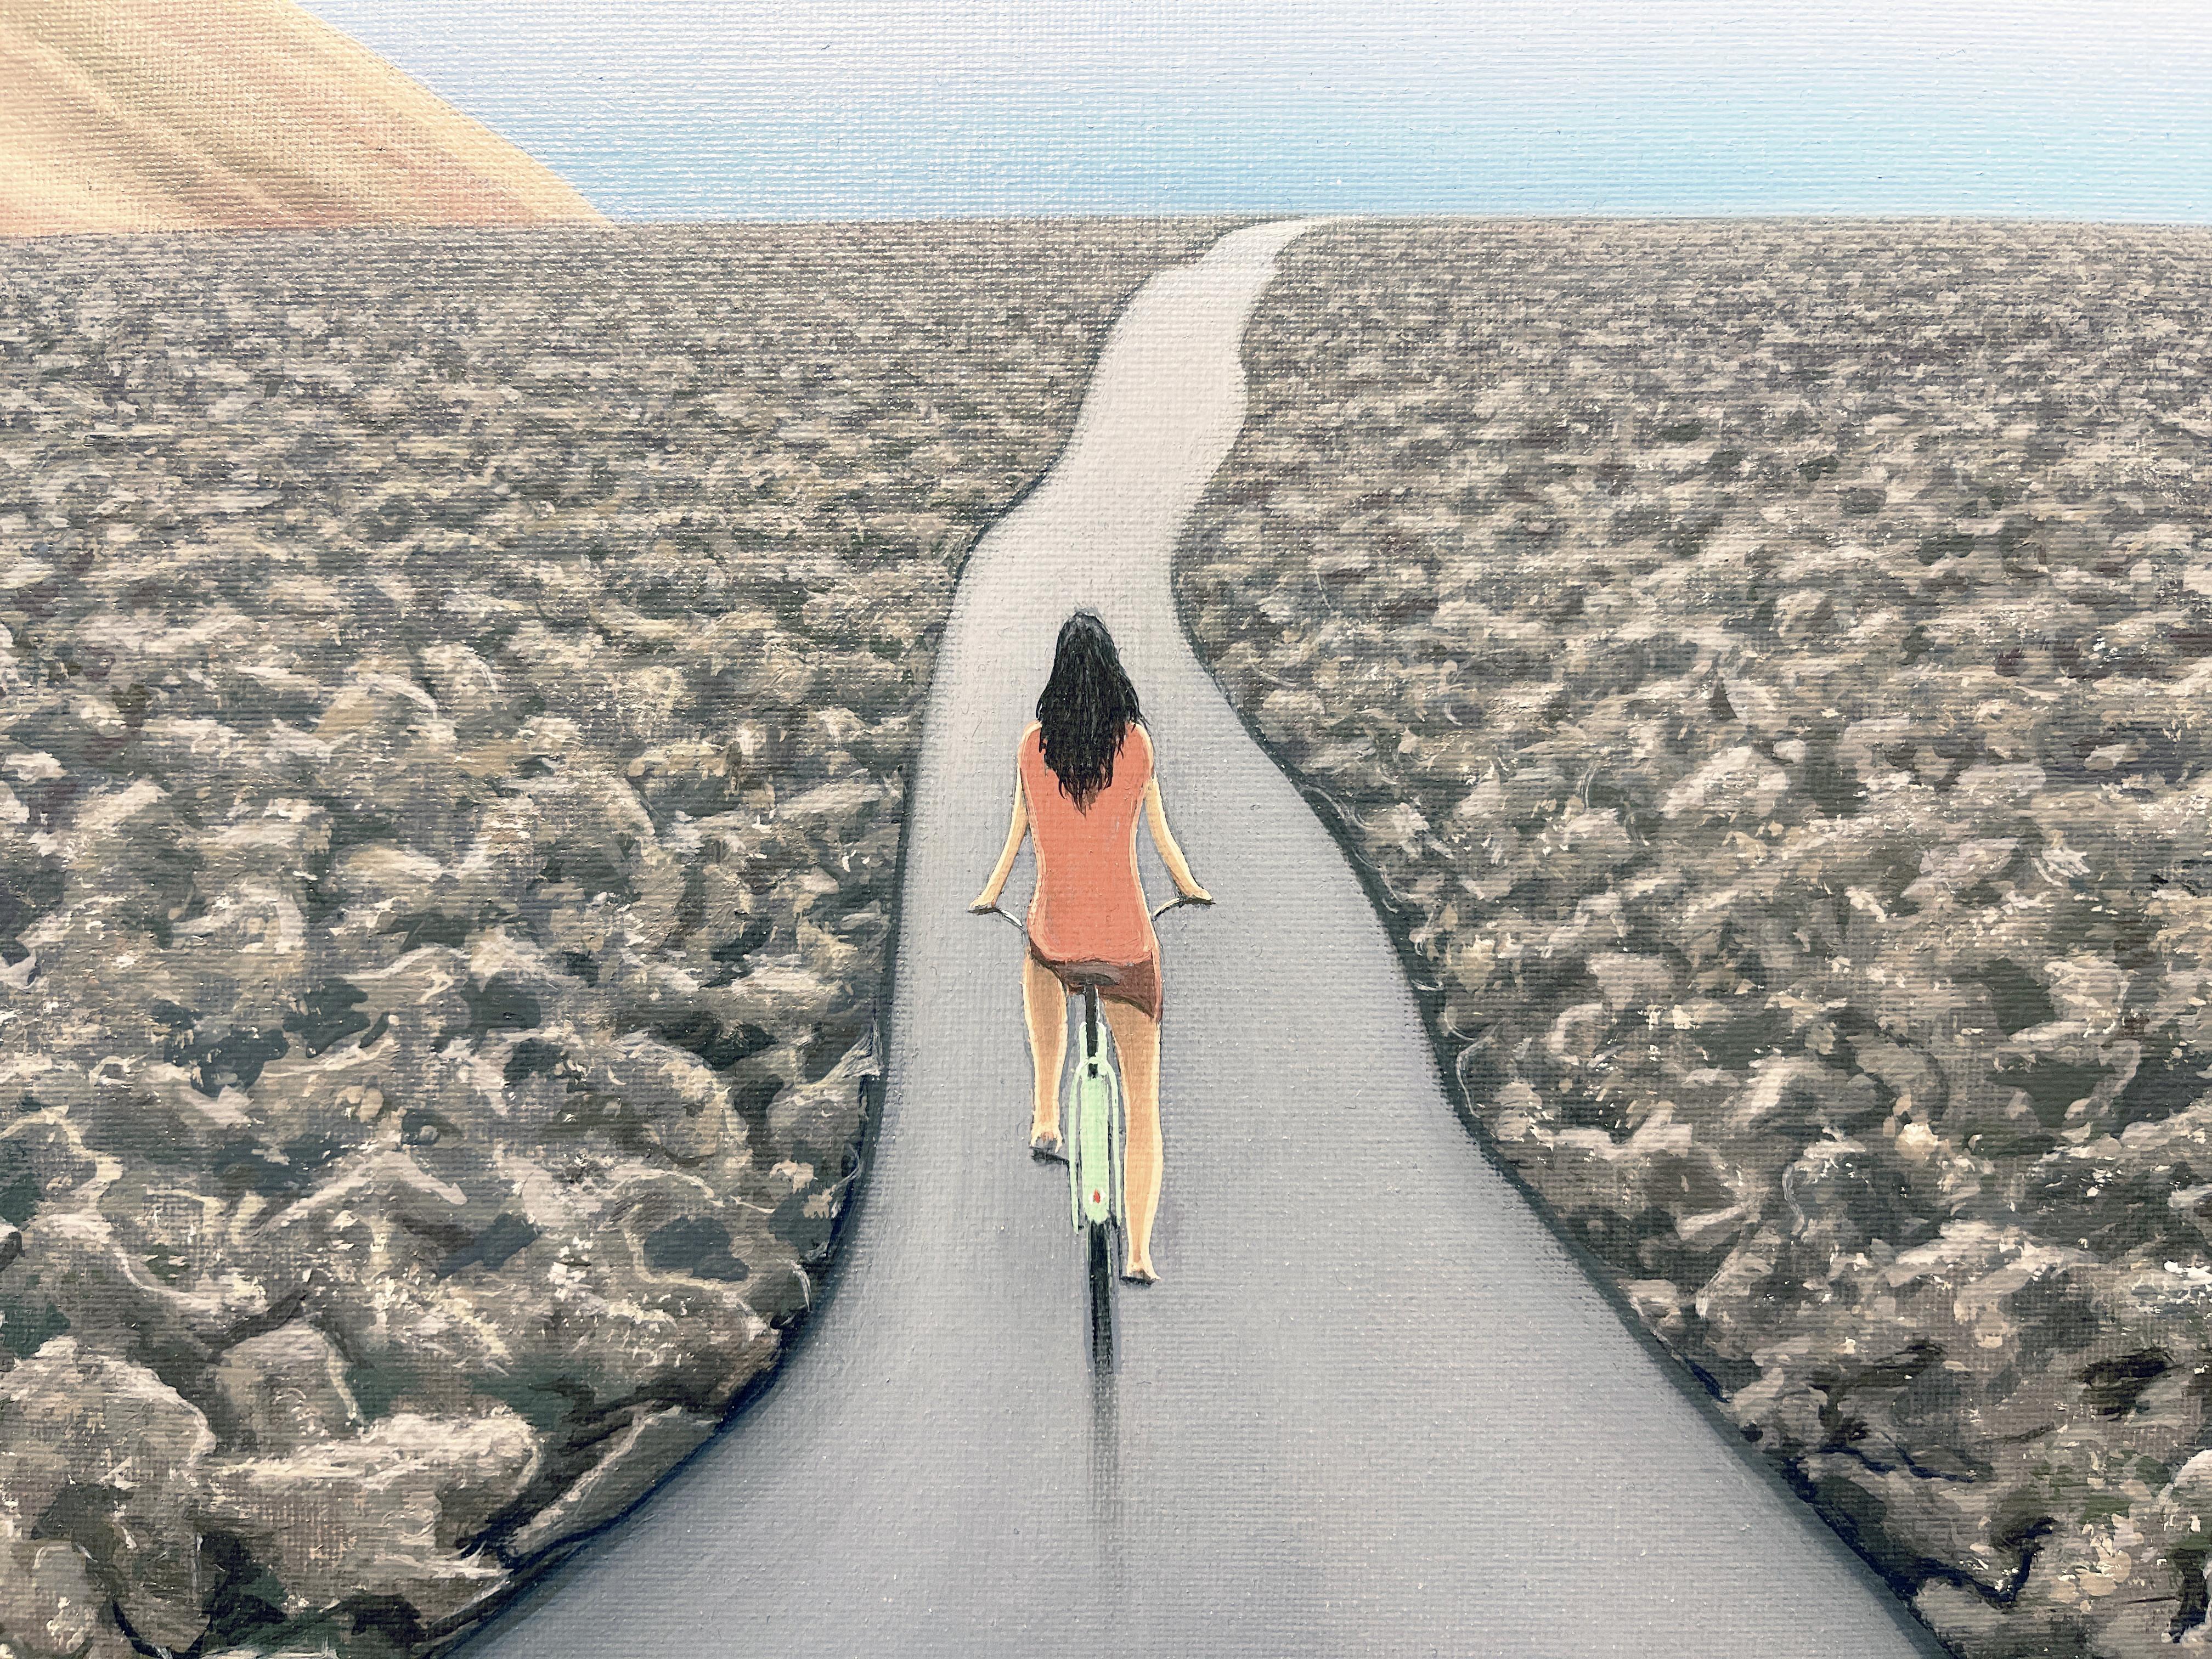  The Yearning of Jose - Surreal Landscape with Woman Riding a Bicycle - Contemporary Painting by René Monzón Relova “Pozas”